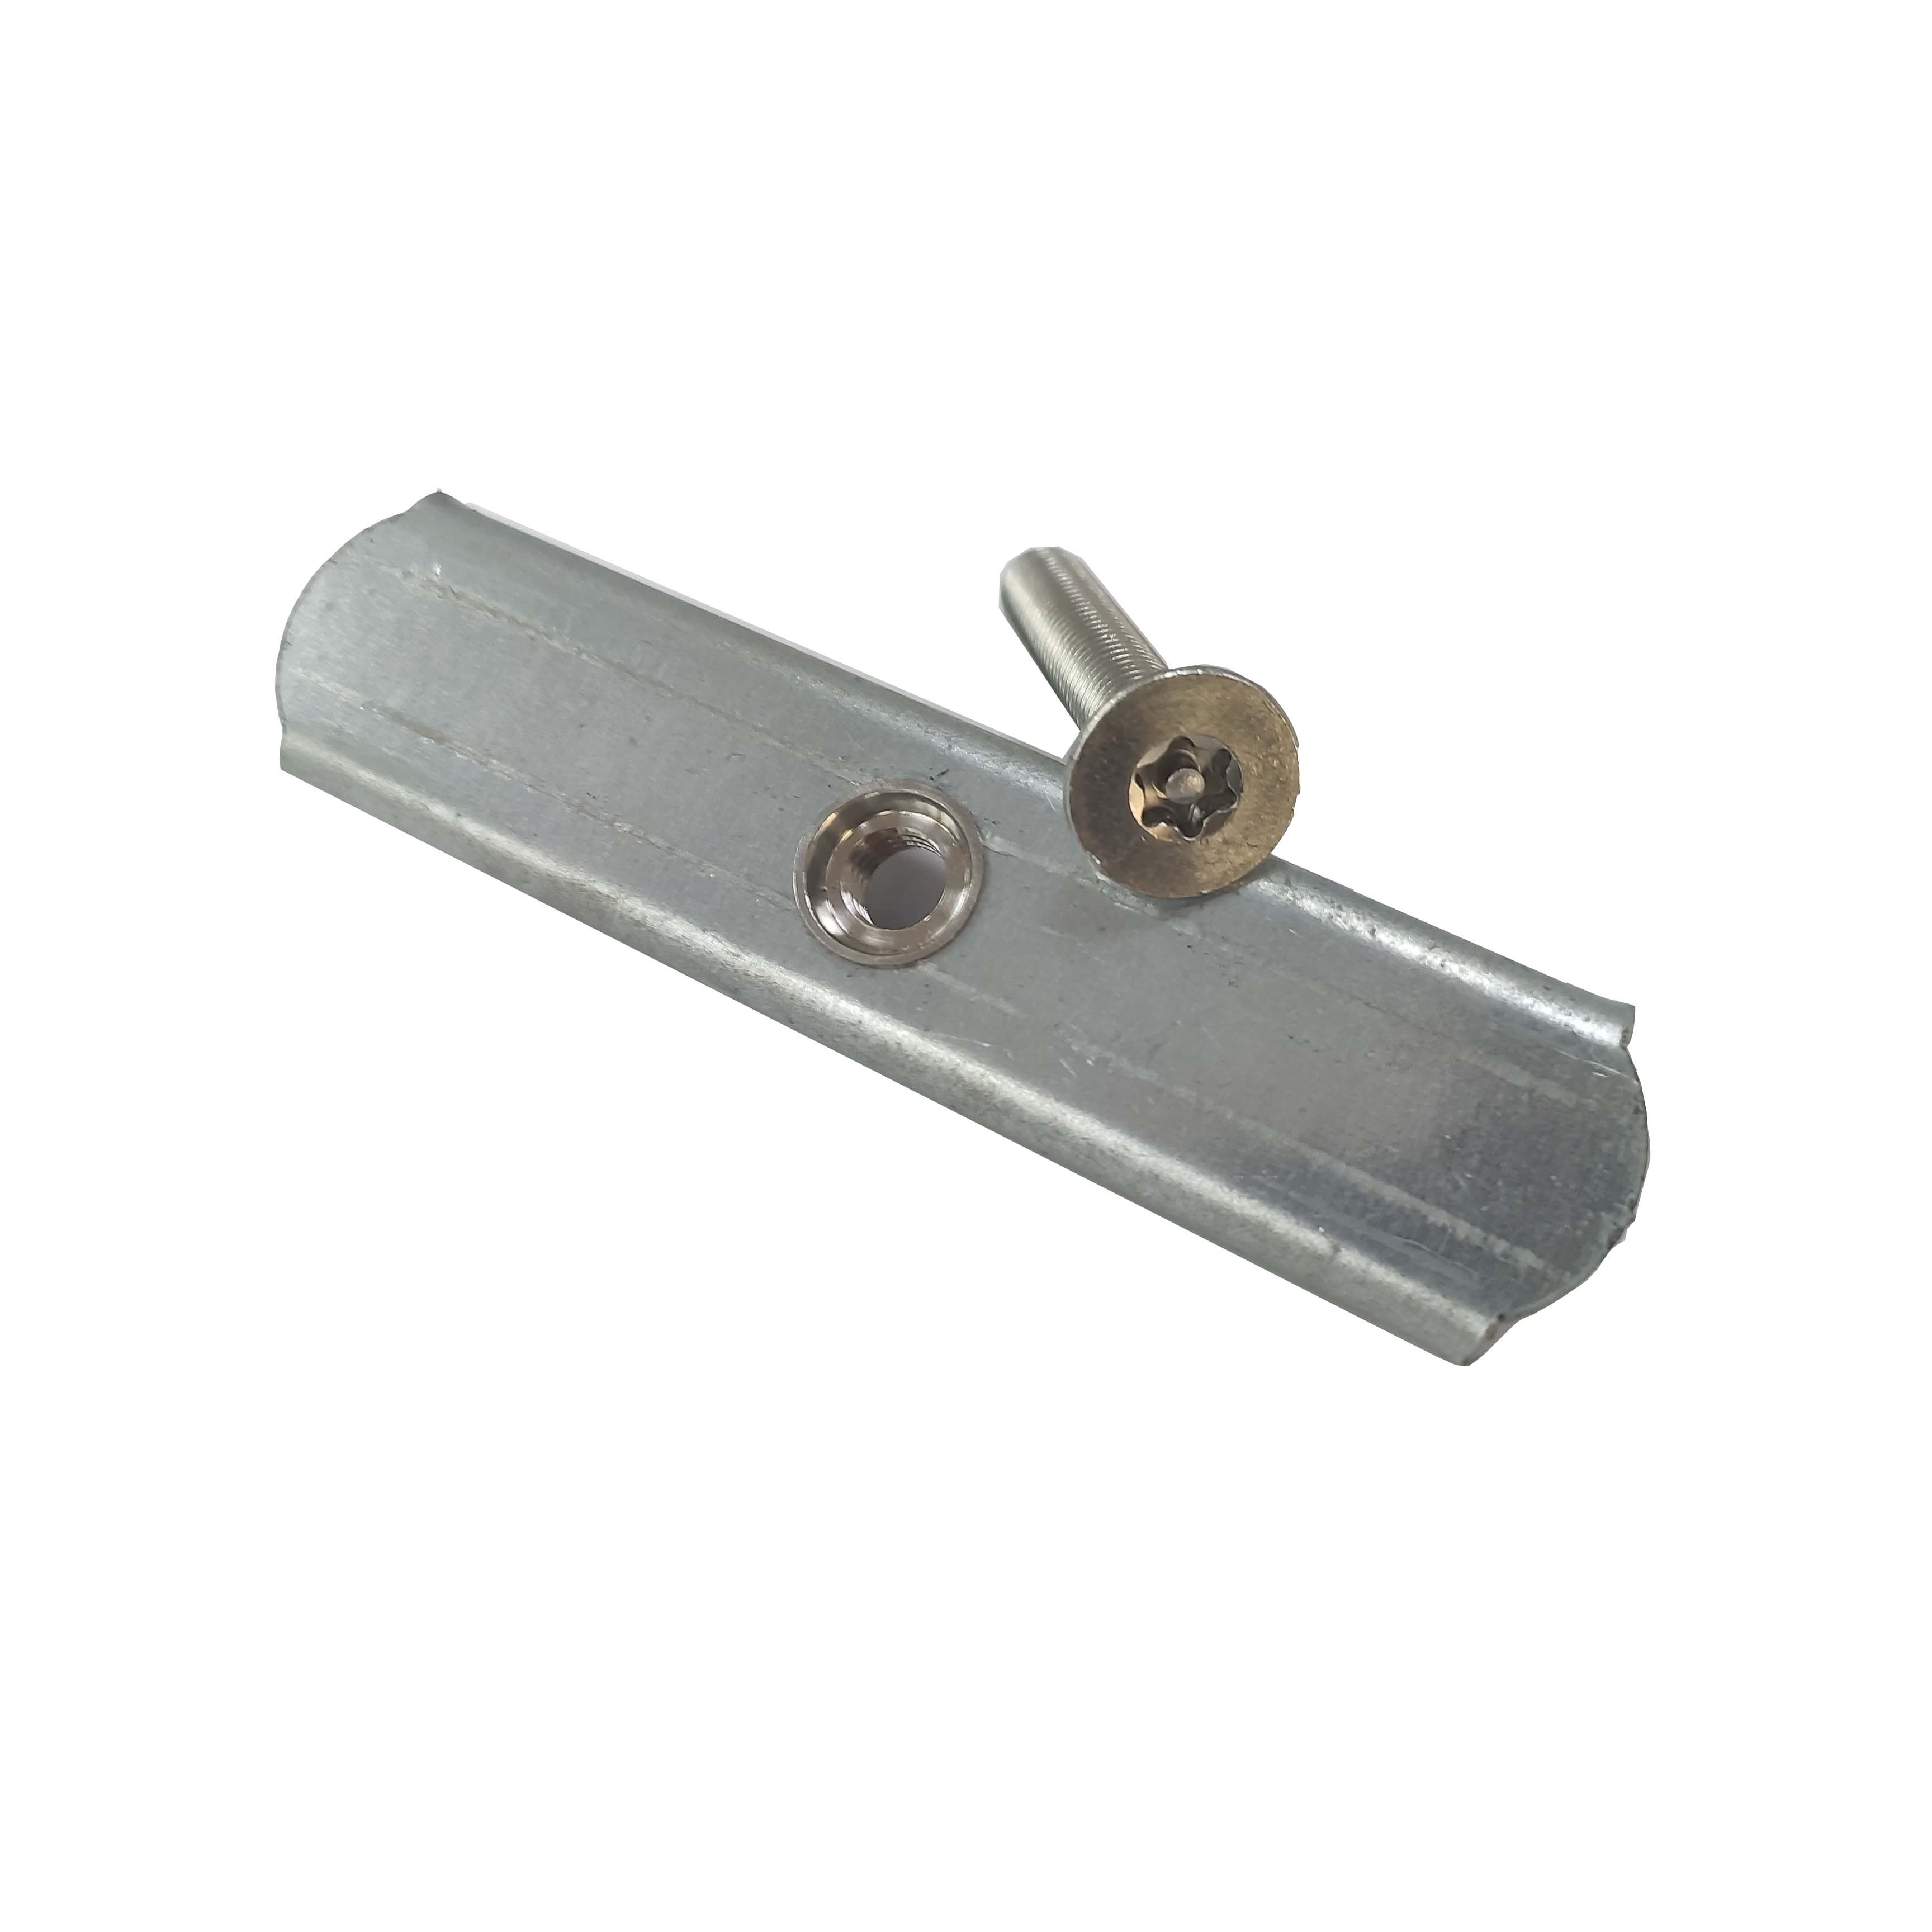 Locking Bar with Stainless Steel Security Bolt